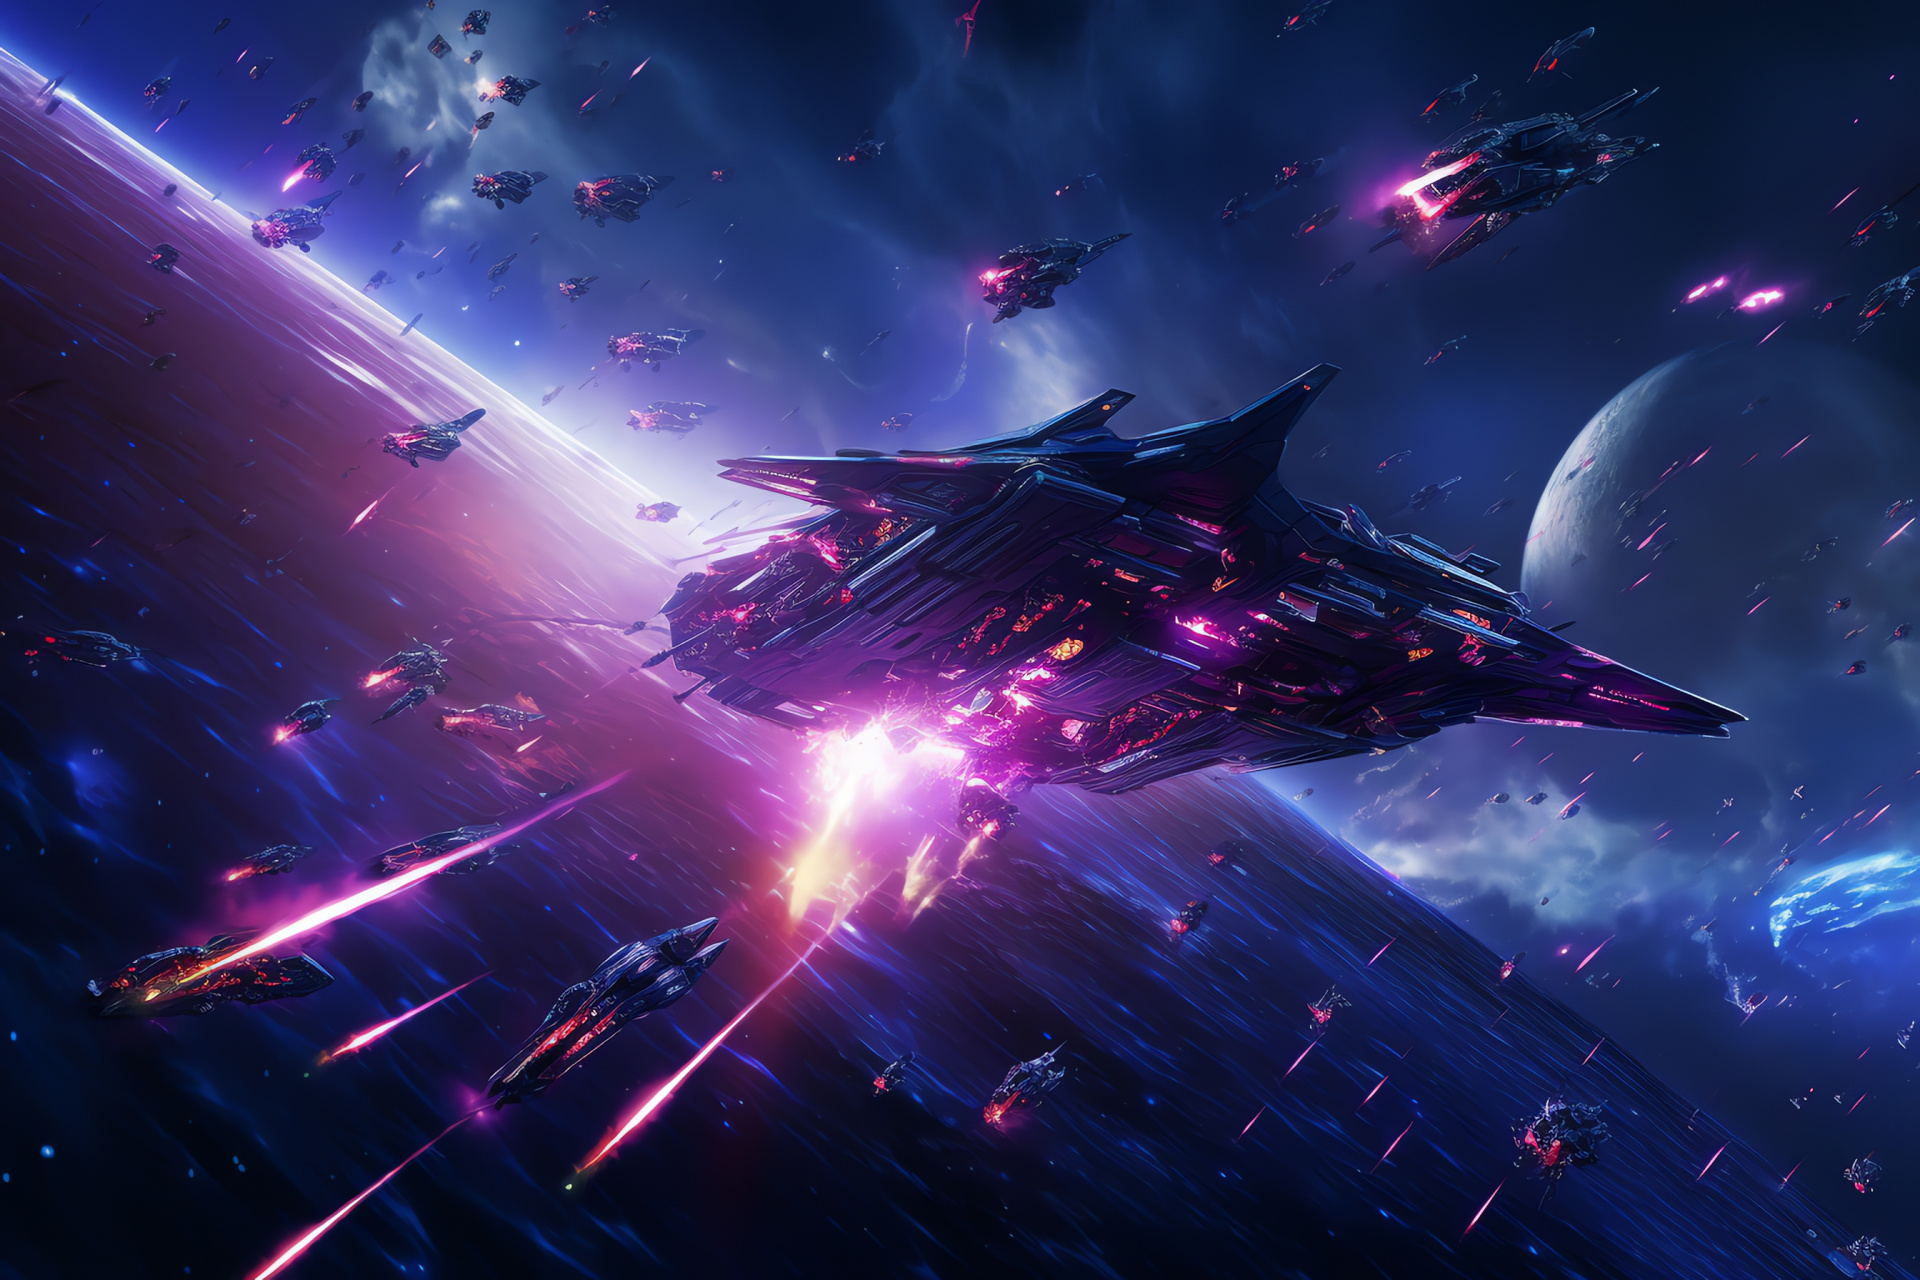 Starfighter squadron, Outer space dogfight, Celestial combat, Purple cosmic mist, Galaxies collision, HD Desktop Wallpaper